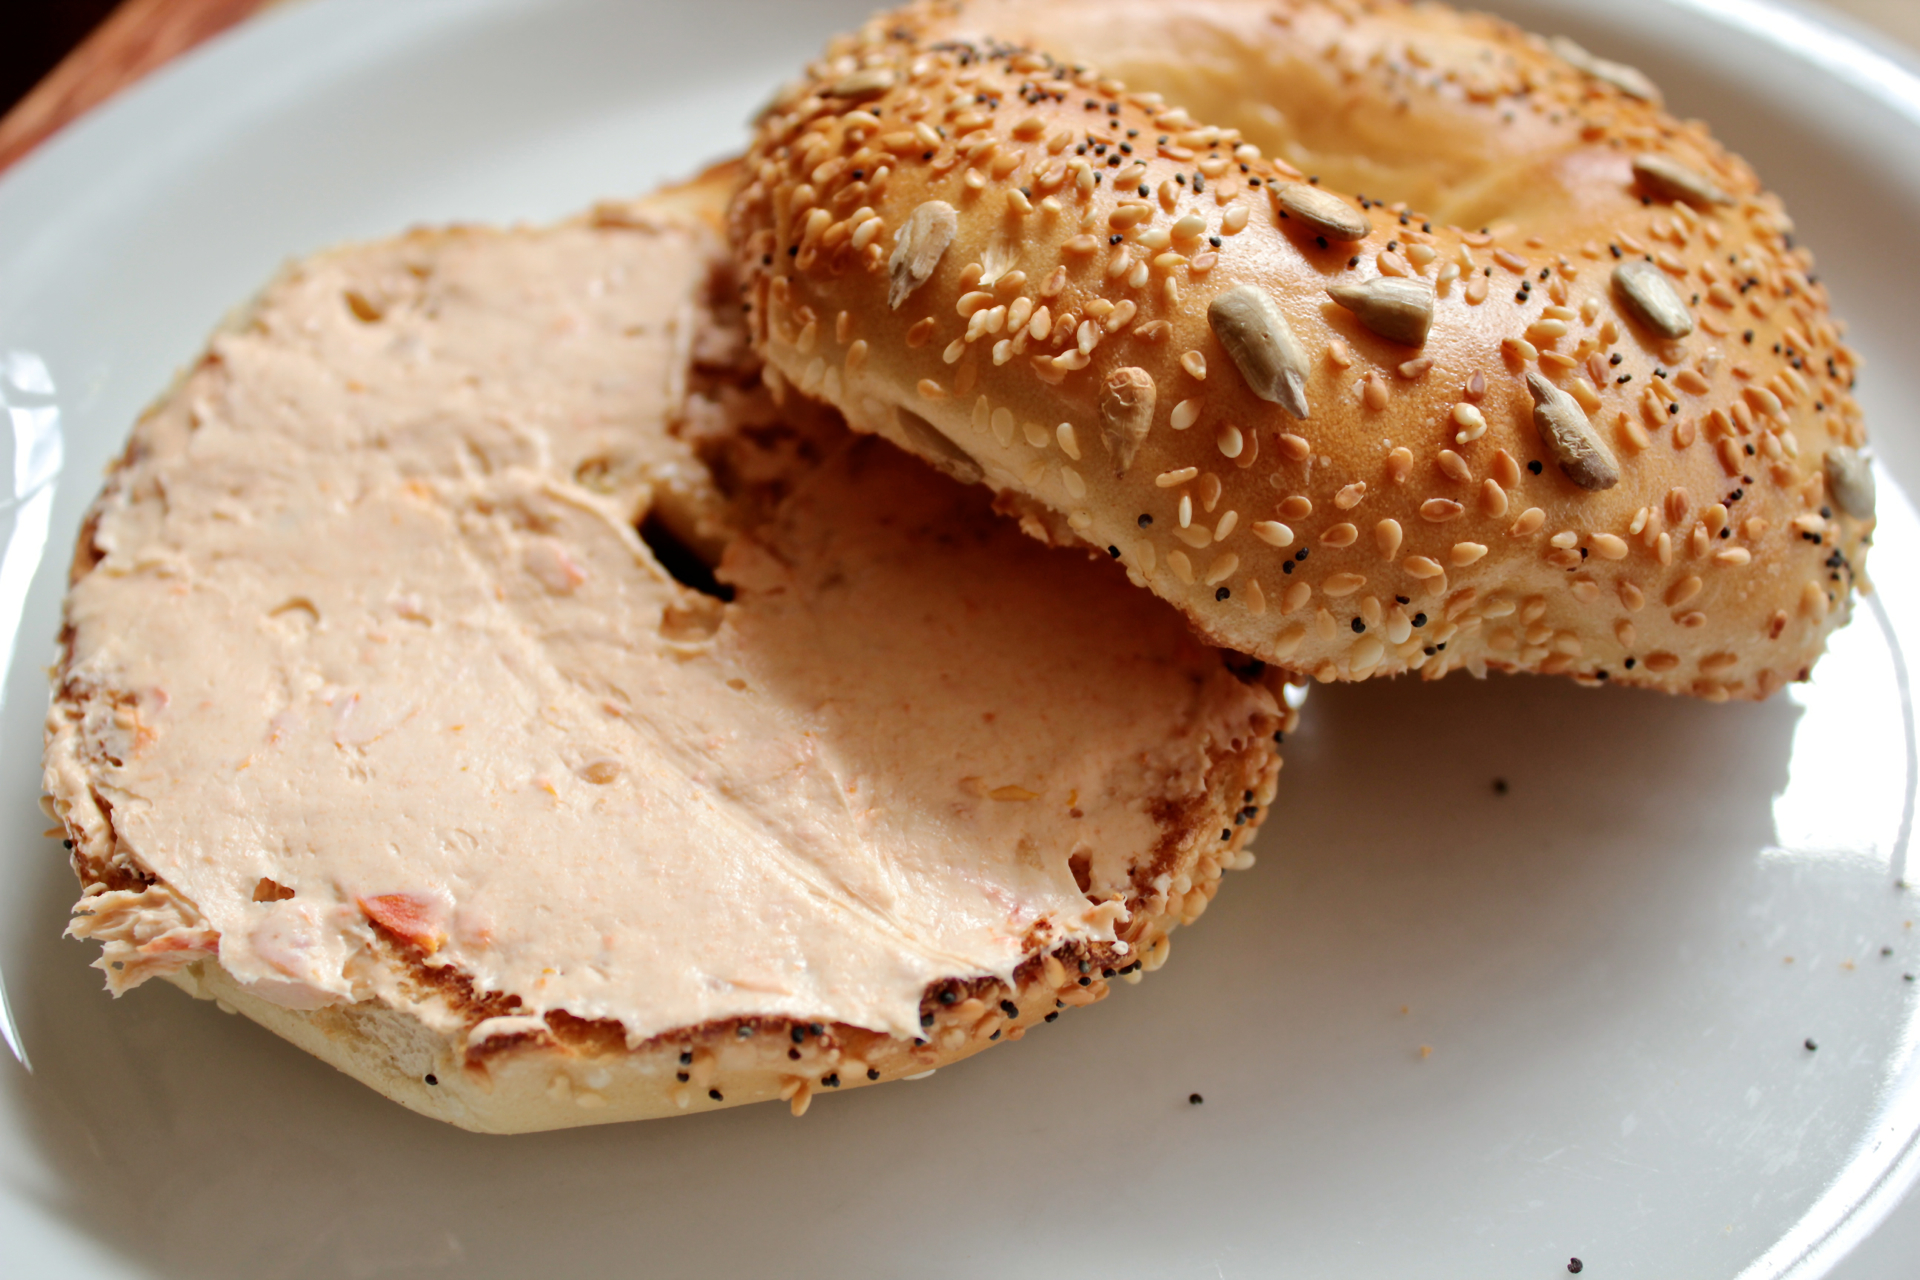 An everything bagel with sun-dried tomato spread.